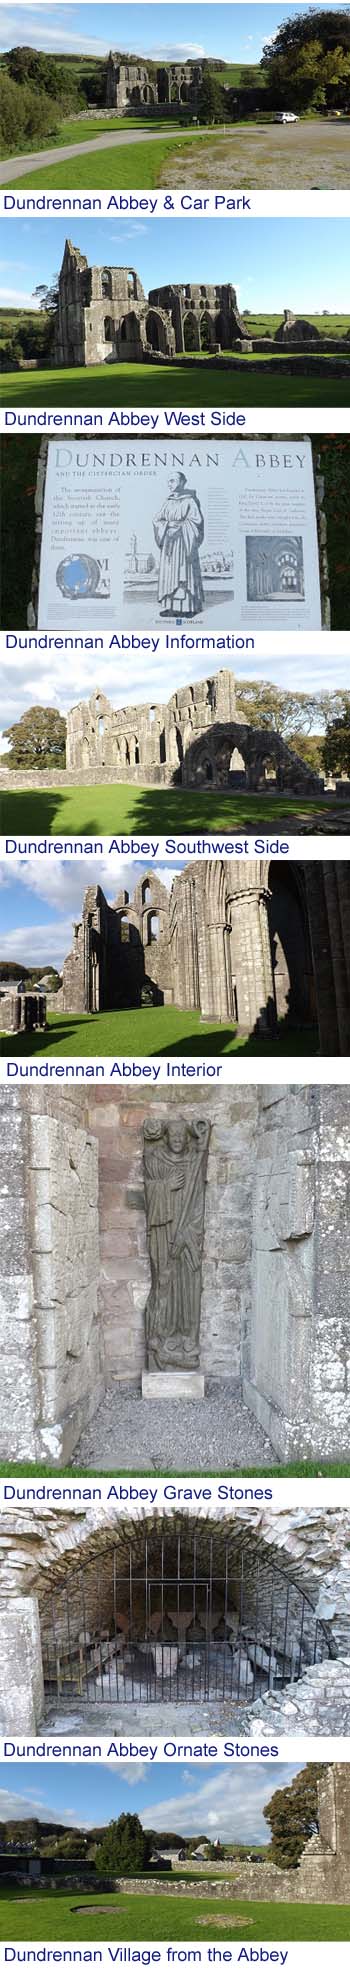 Dundrennan Abbey Images